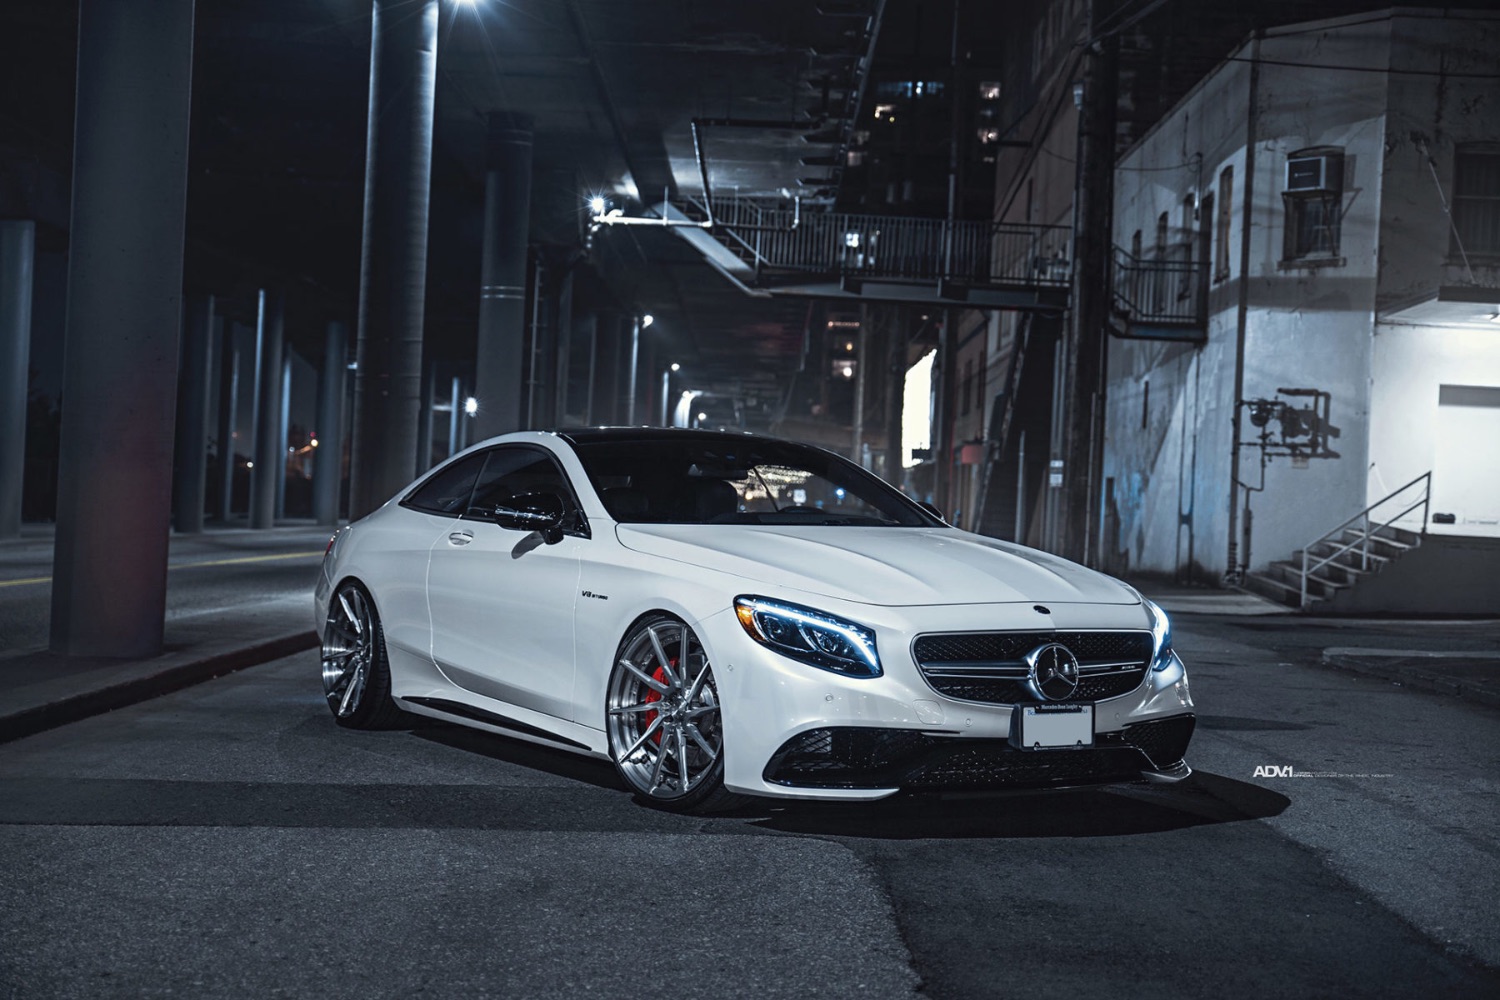 pearl-whitemercedes-benz-s63-amg-s-class-aftermarket-rims-adv1-h